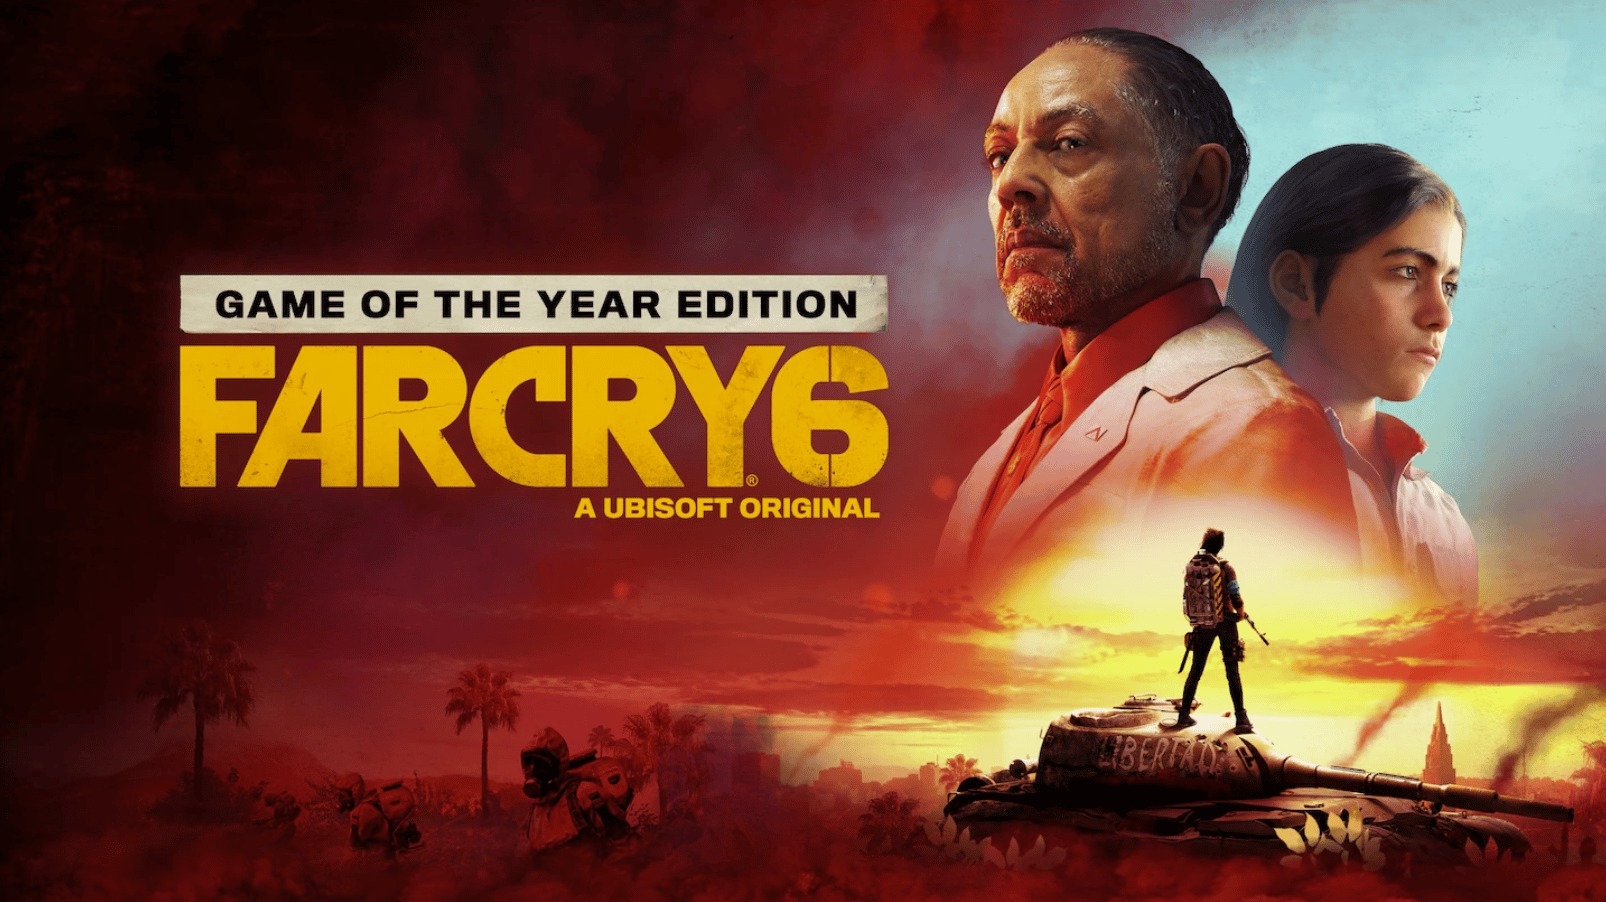 Far Cry 6 Crossplay and Multiplayer - What You Need To Know